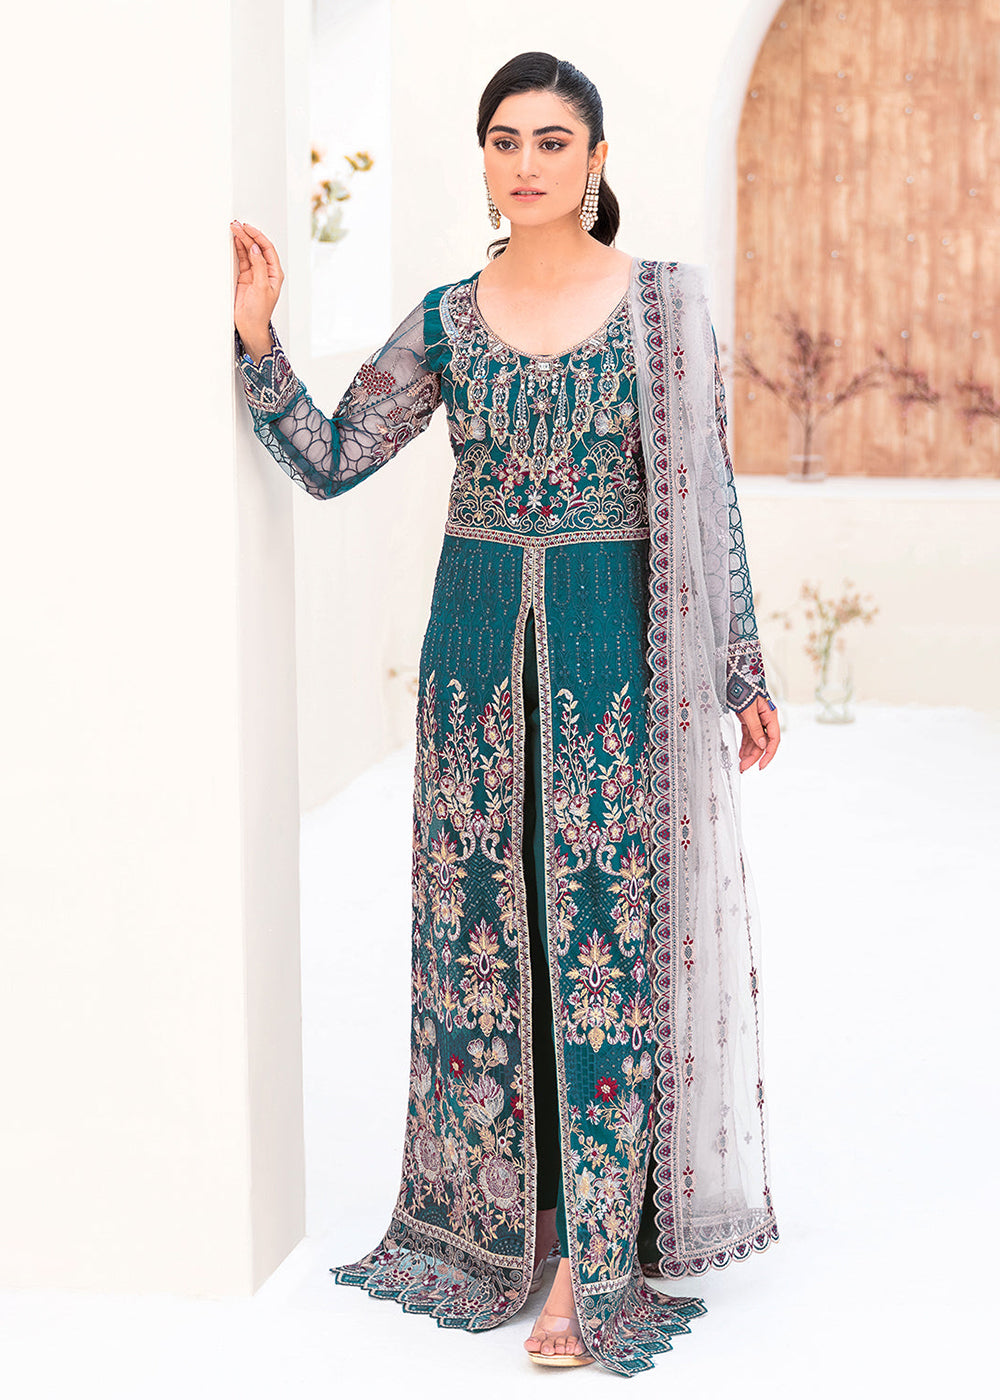 Buy Now Teal Net Embroidered Suit - Ramsha Minhal Collection Vol 8 - #M-810 Online in USA, UK, Canada & Worldwide at Empress Clothing.